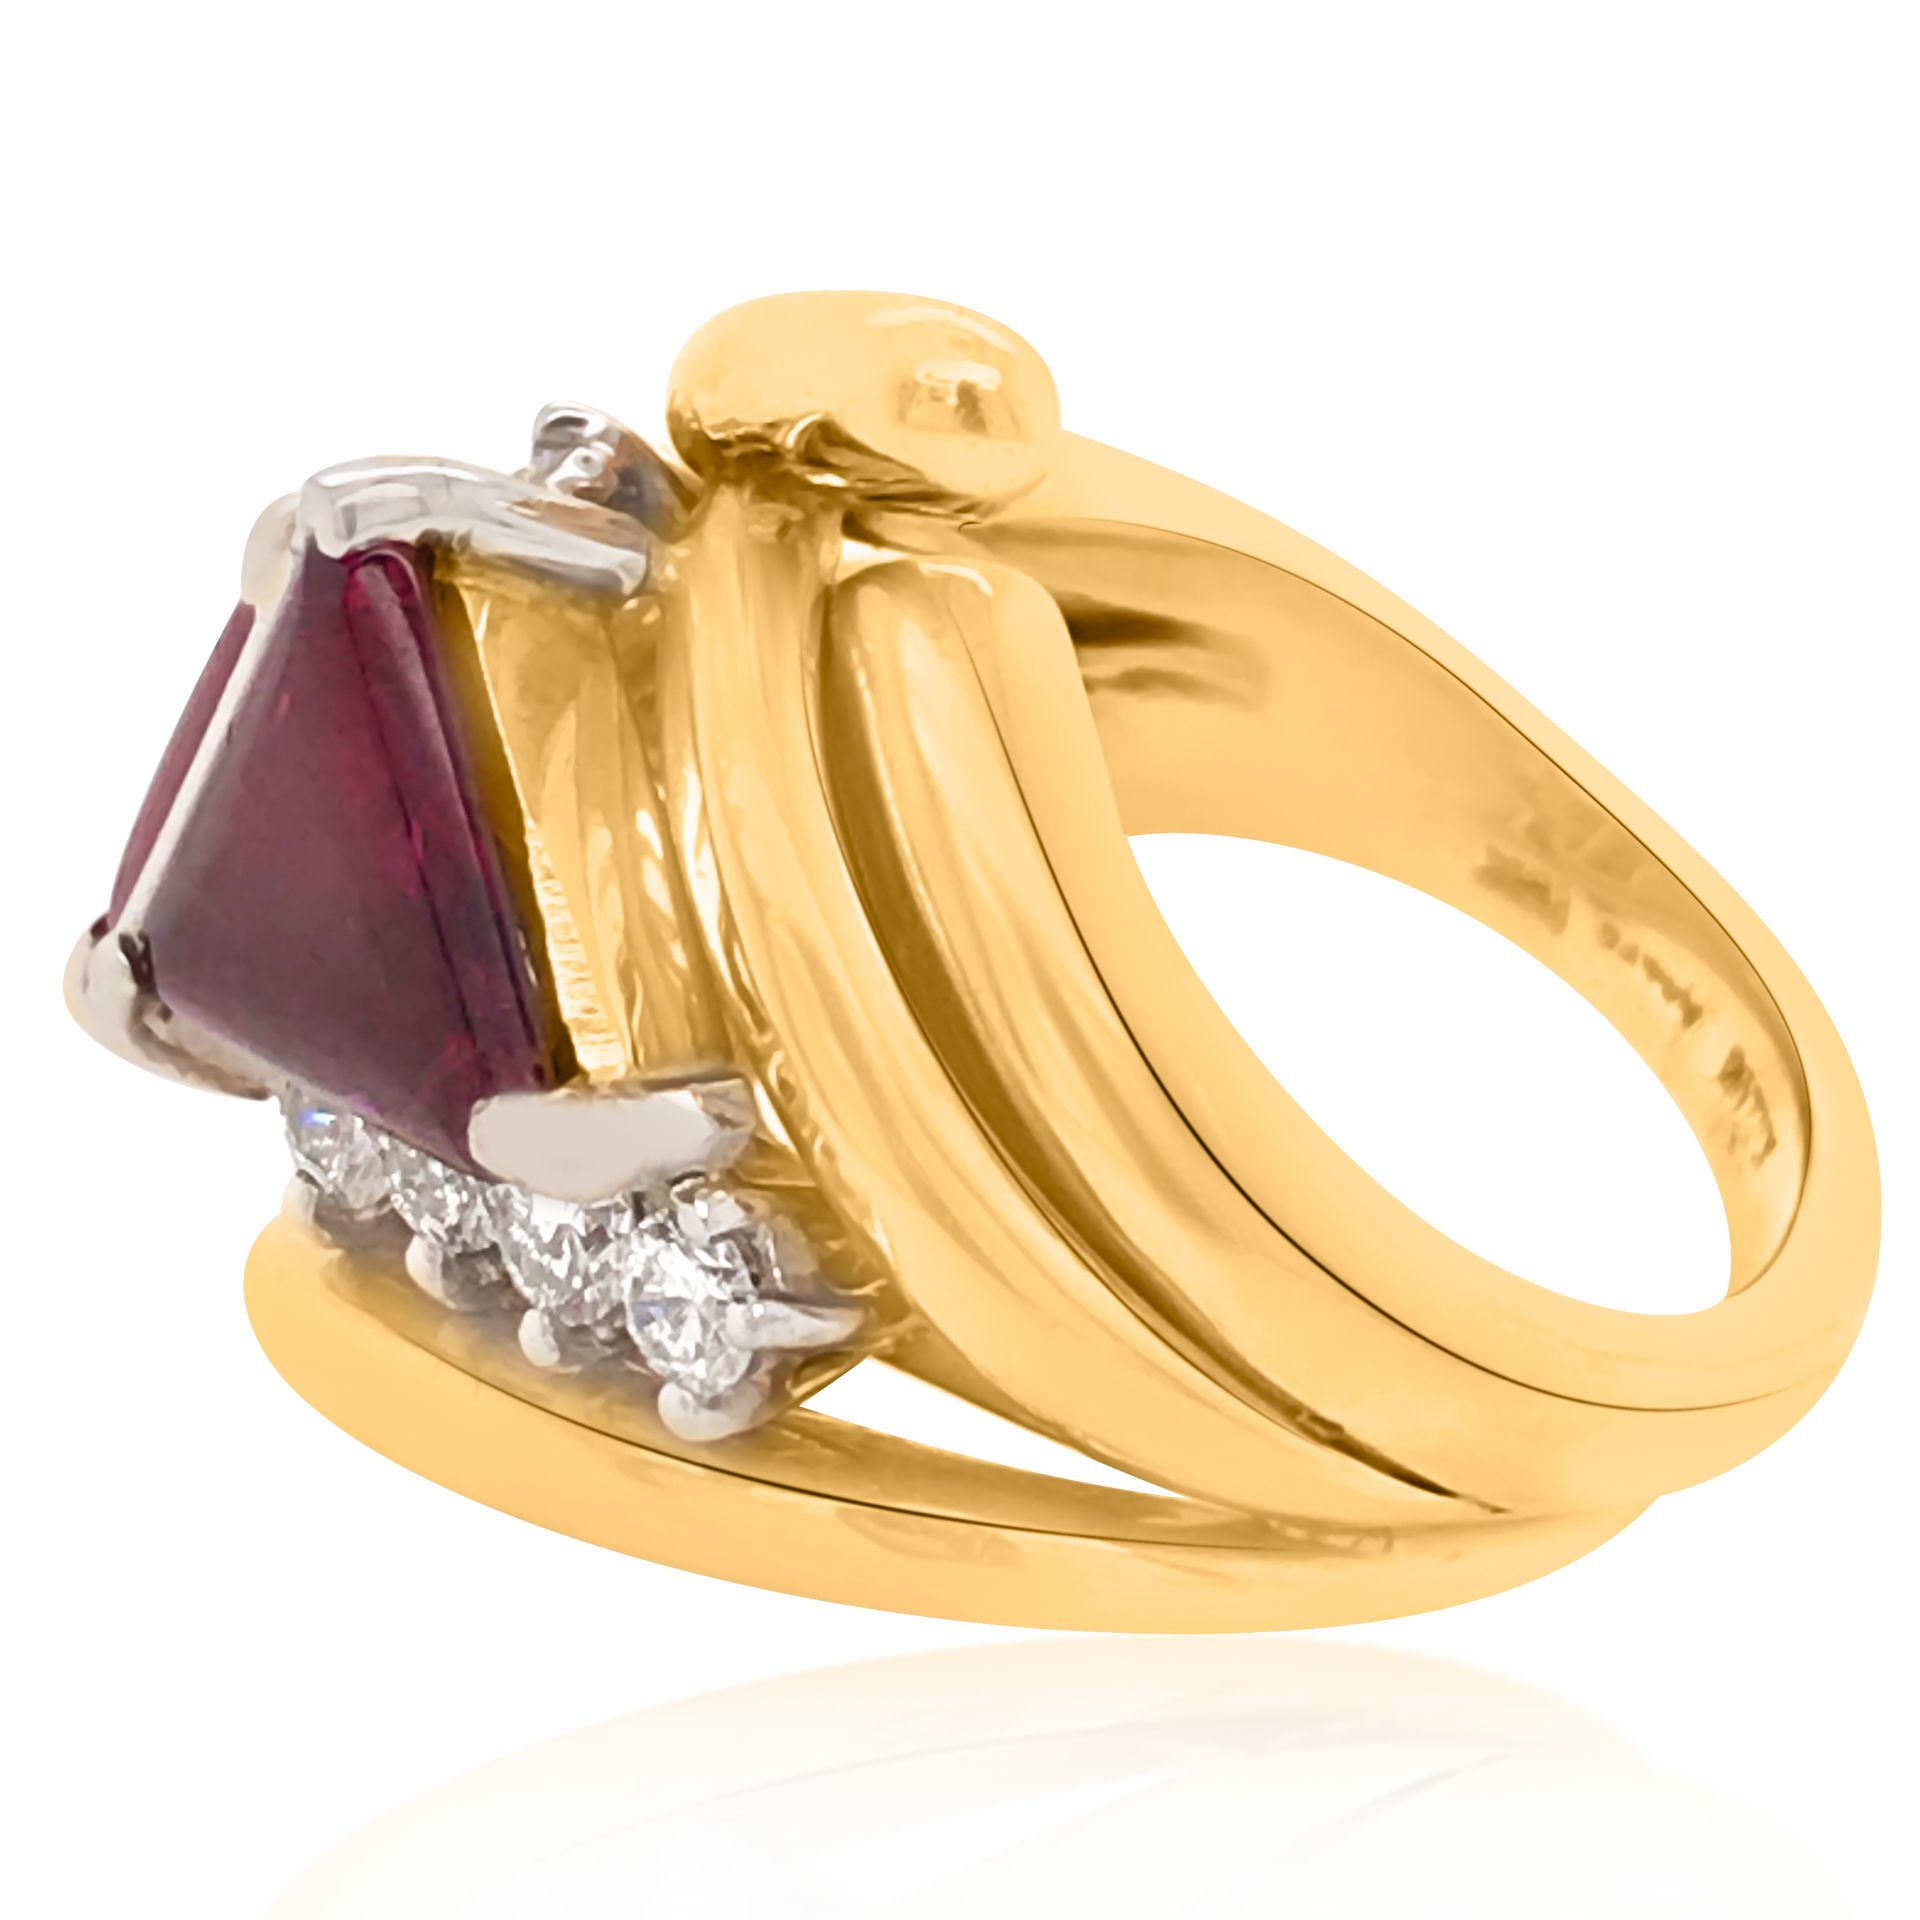 18K GOLD RING WITH RUBY AND DIAMONDS - Image 4 of 5